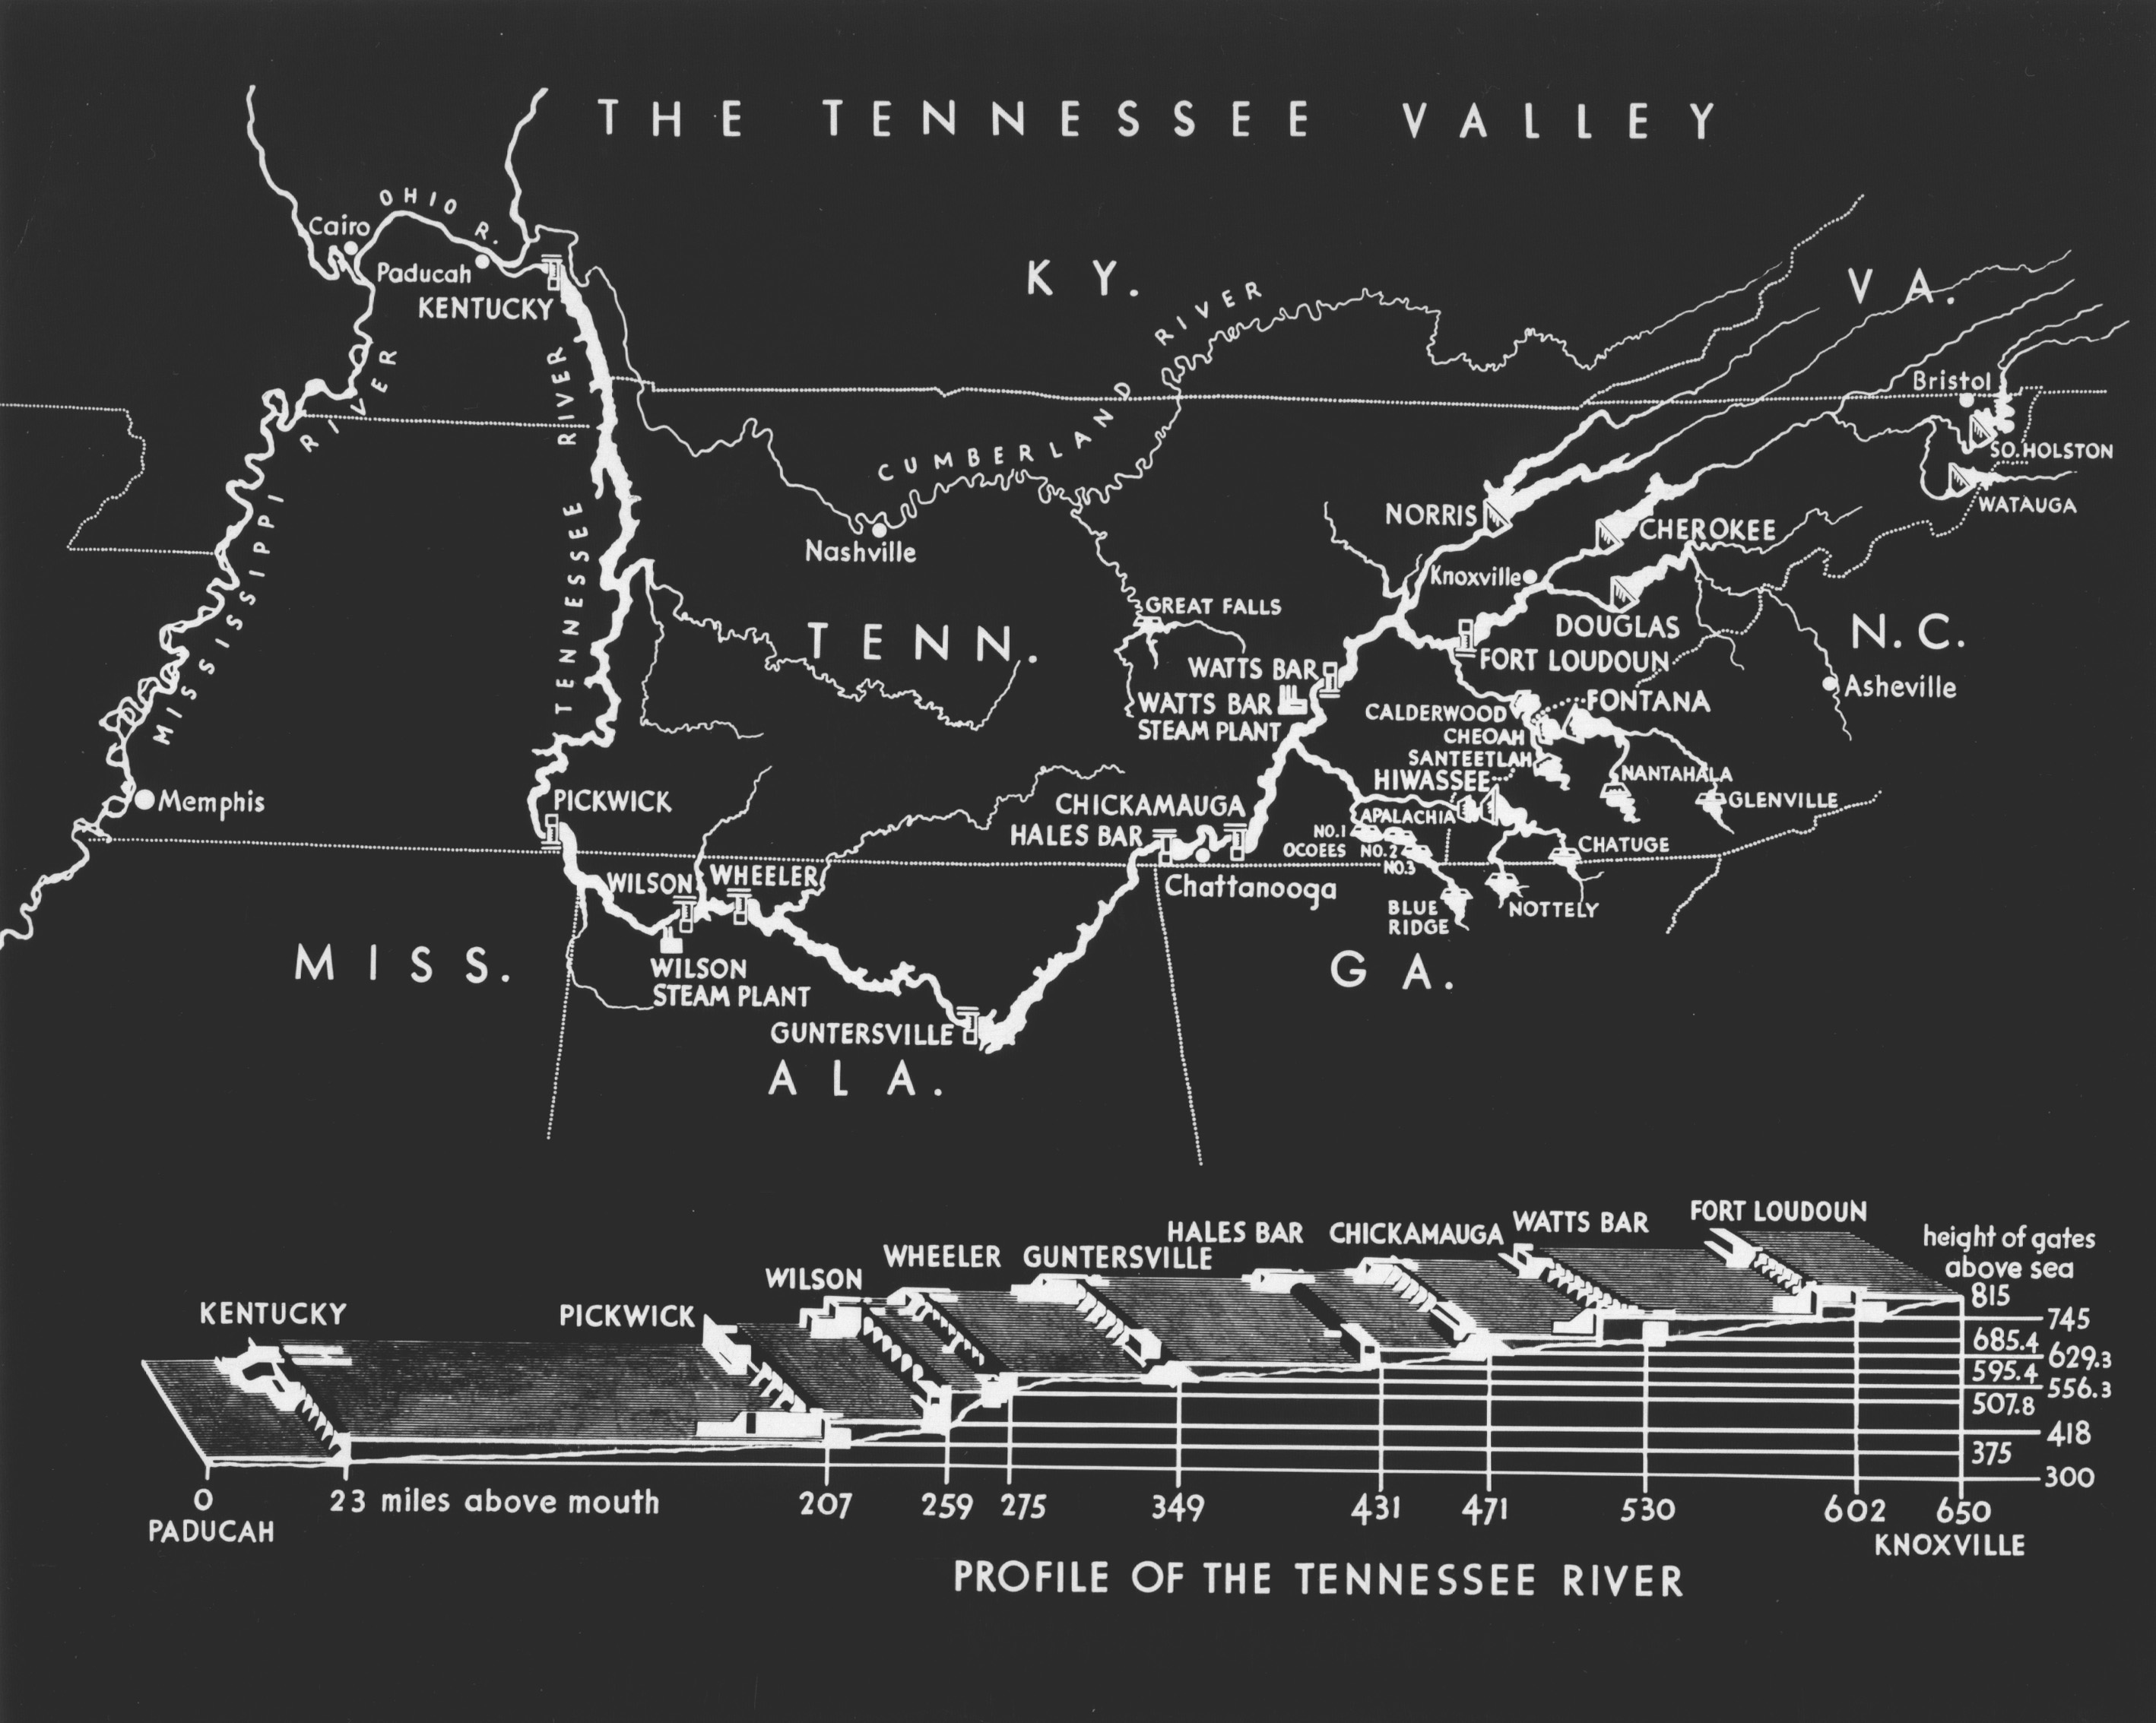 A black and white detail of the Tennessee River basin and its elevations